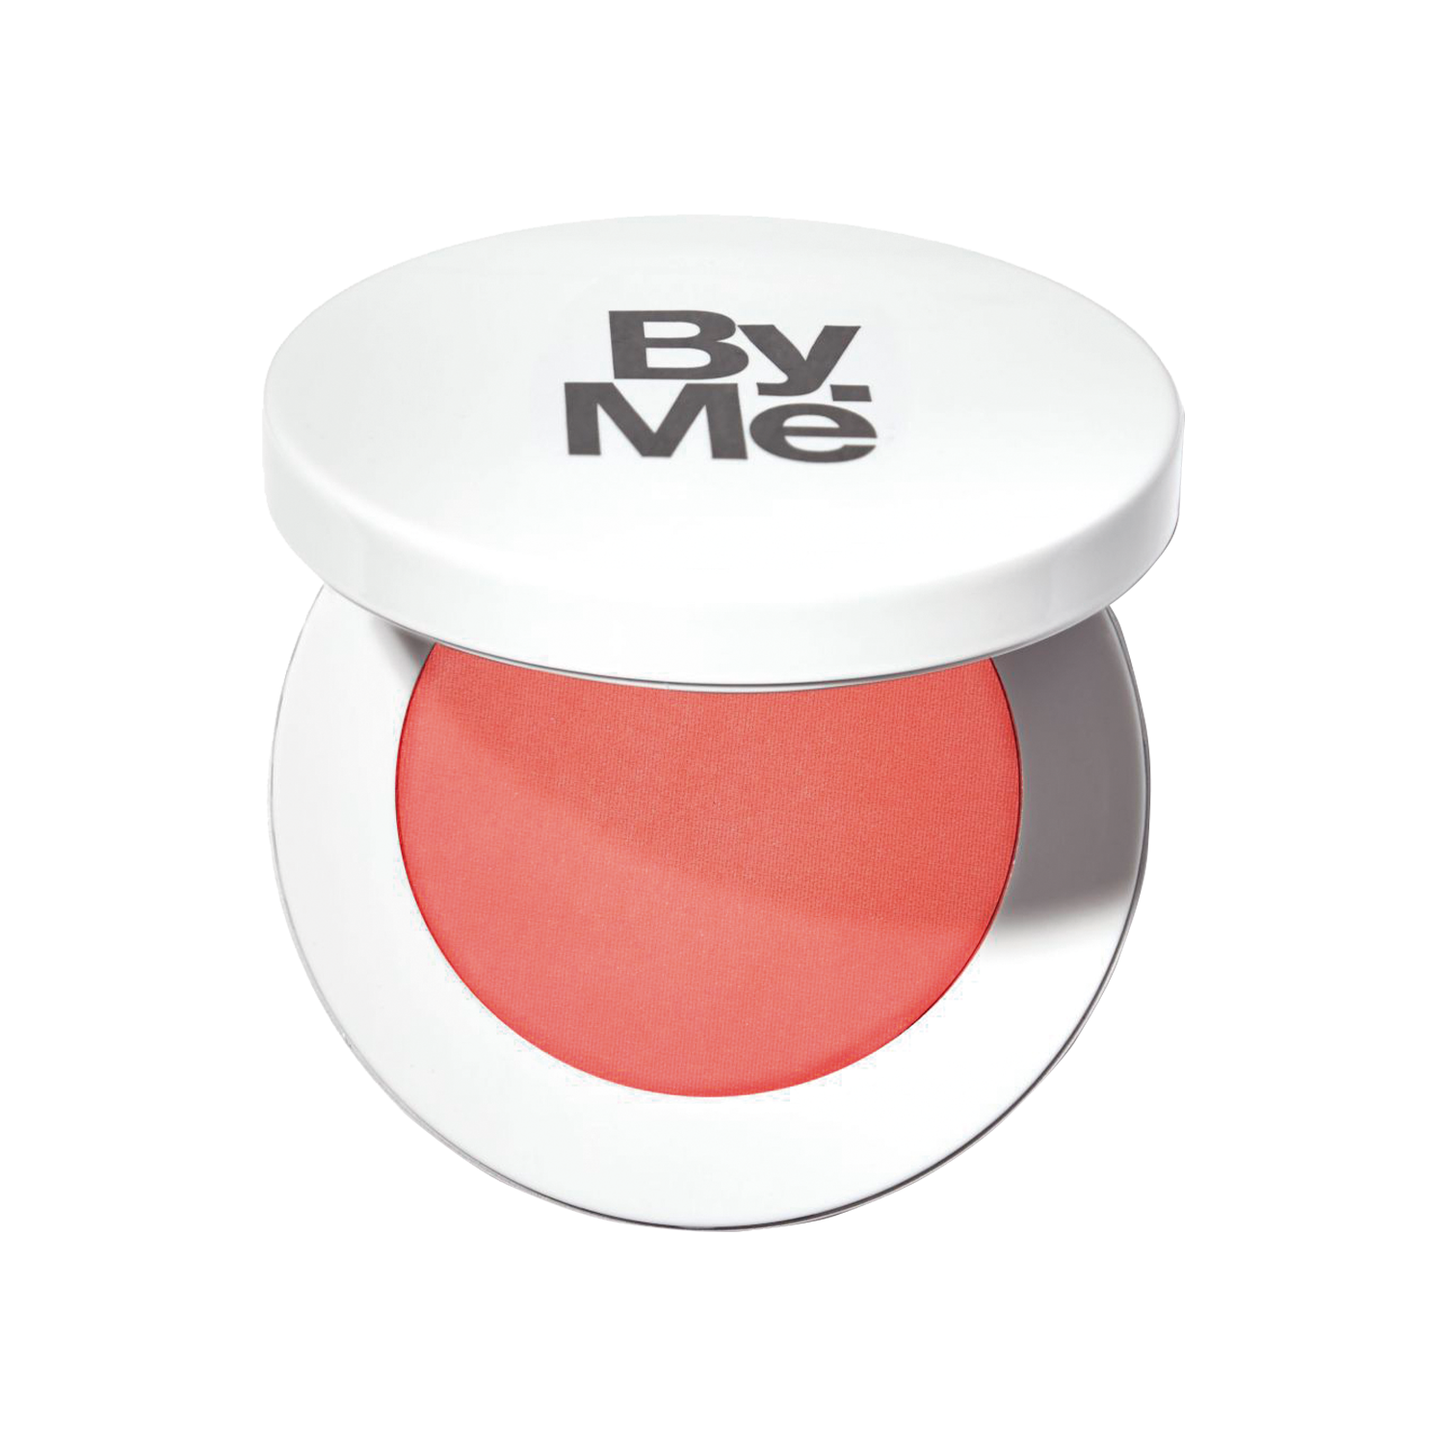 MyBeautyBrand Pure Power Blush in India Coral 502